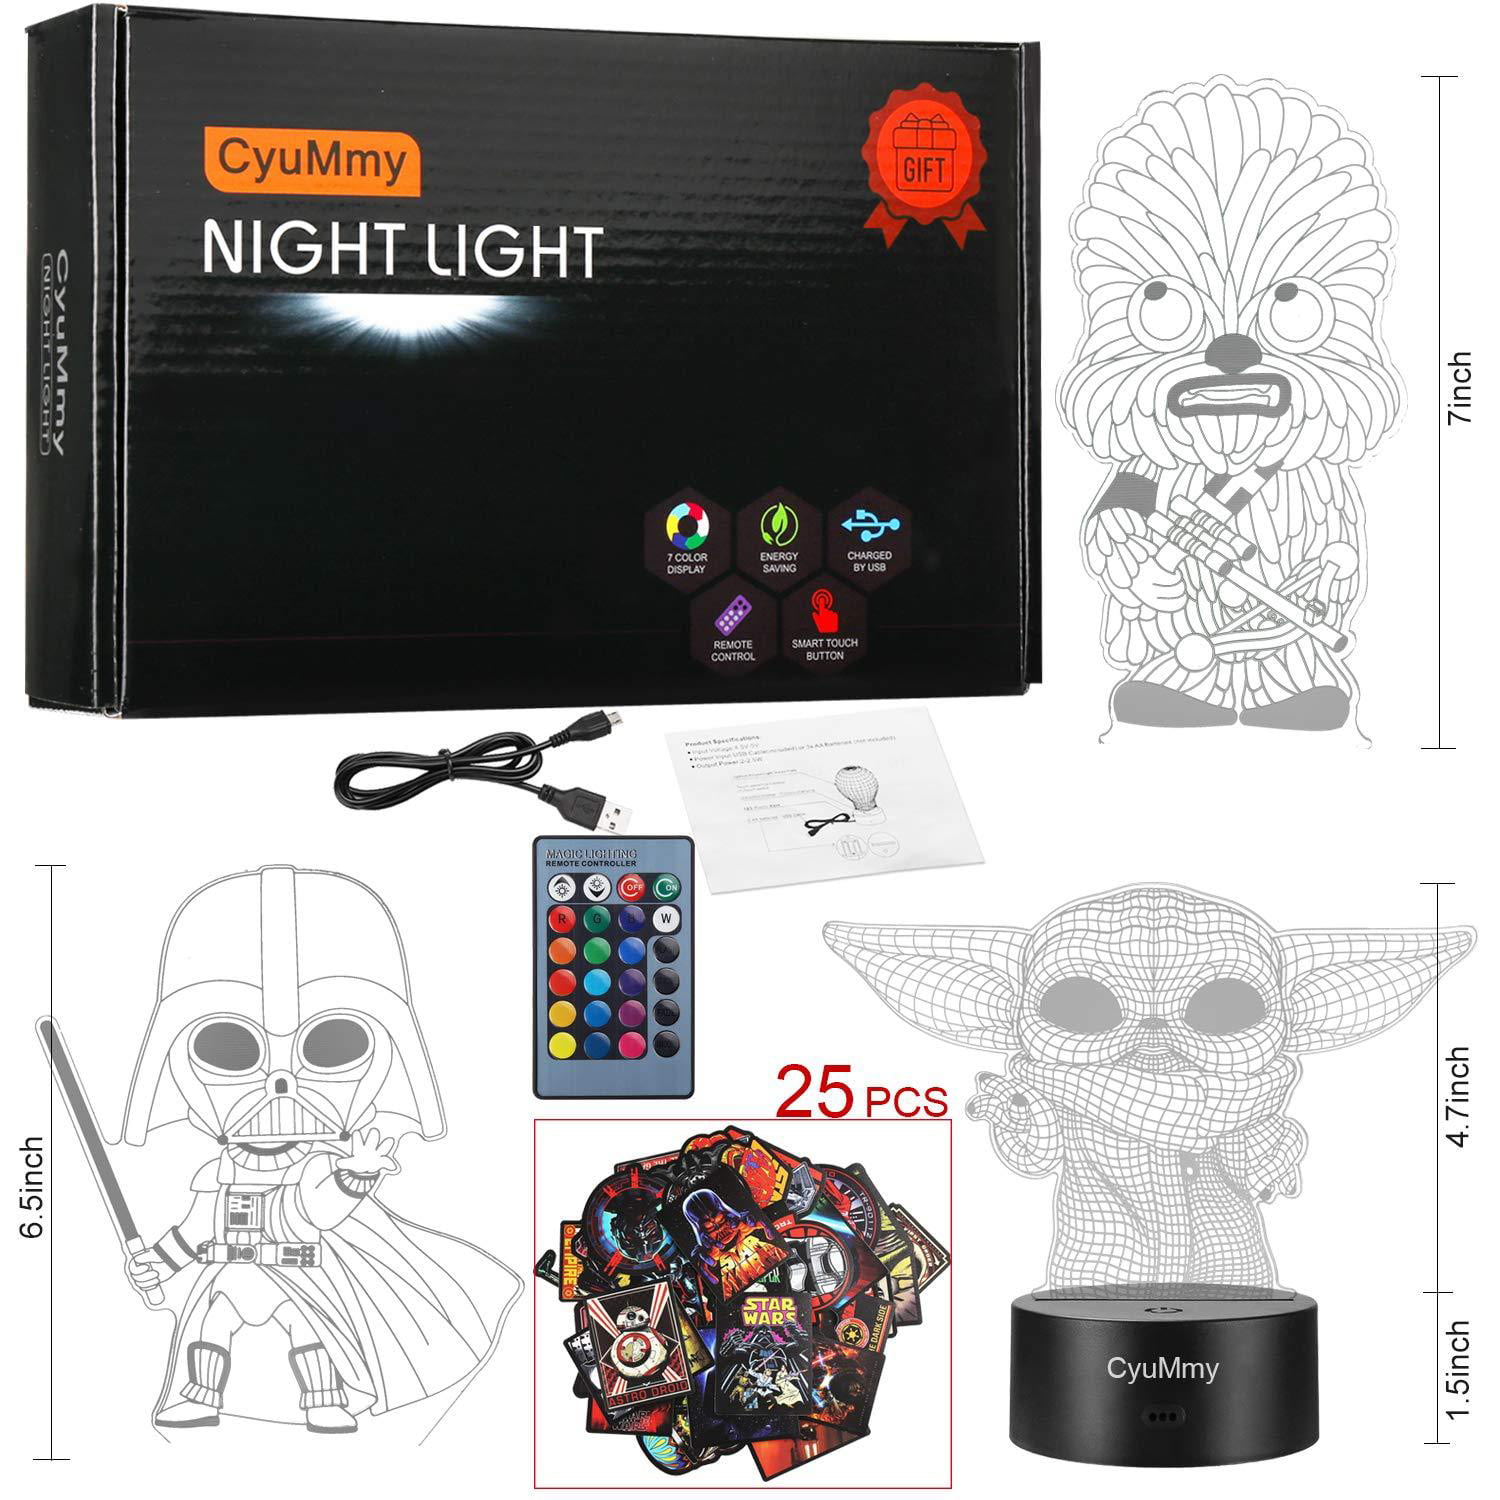 3D Illusion Star Wars Night Lights LED 7 Colors Changing Desk Lamp for Kids Gift 